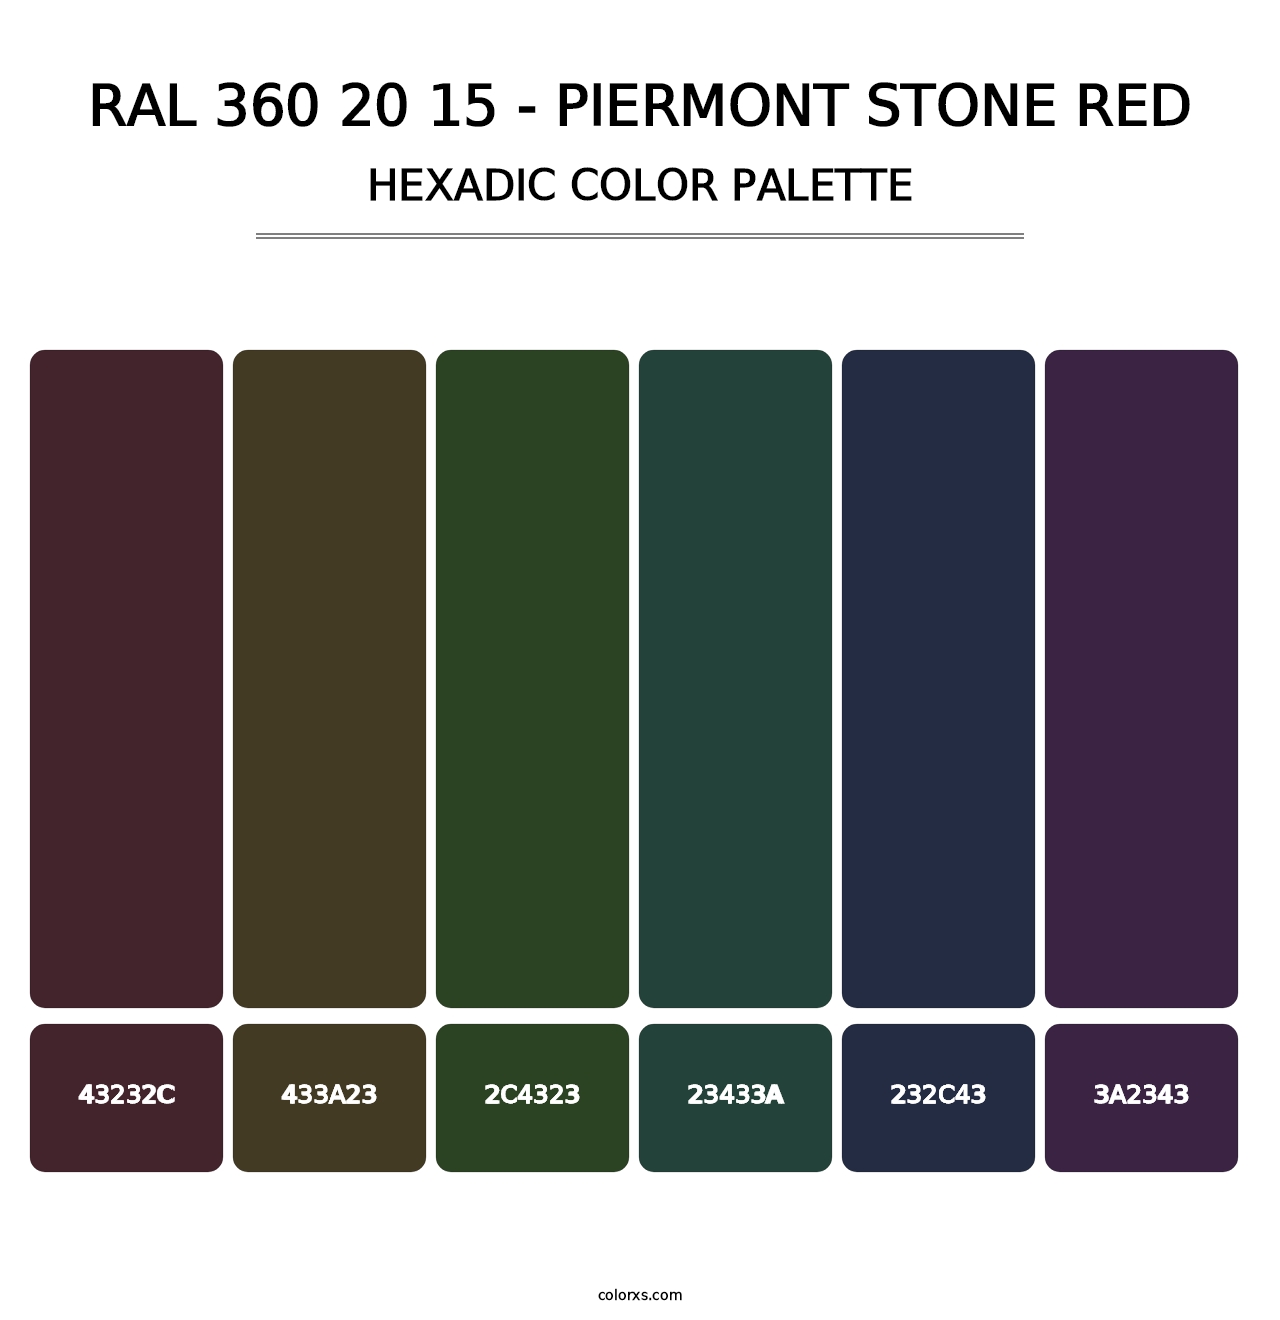 RAL 360 20 15 - Piermont Stone Red - Hexadic Color Palette